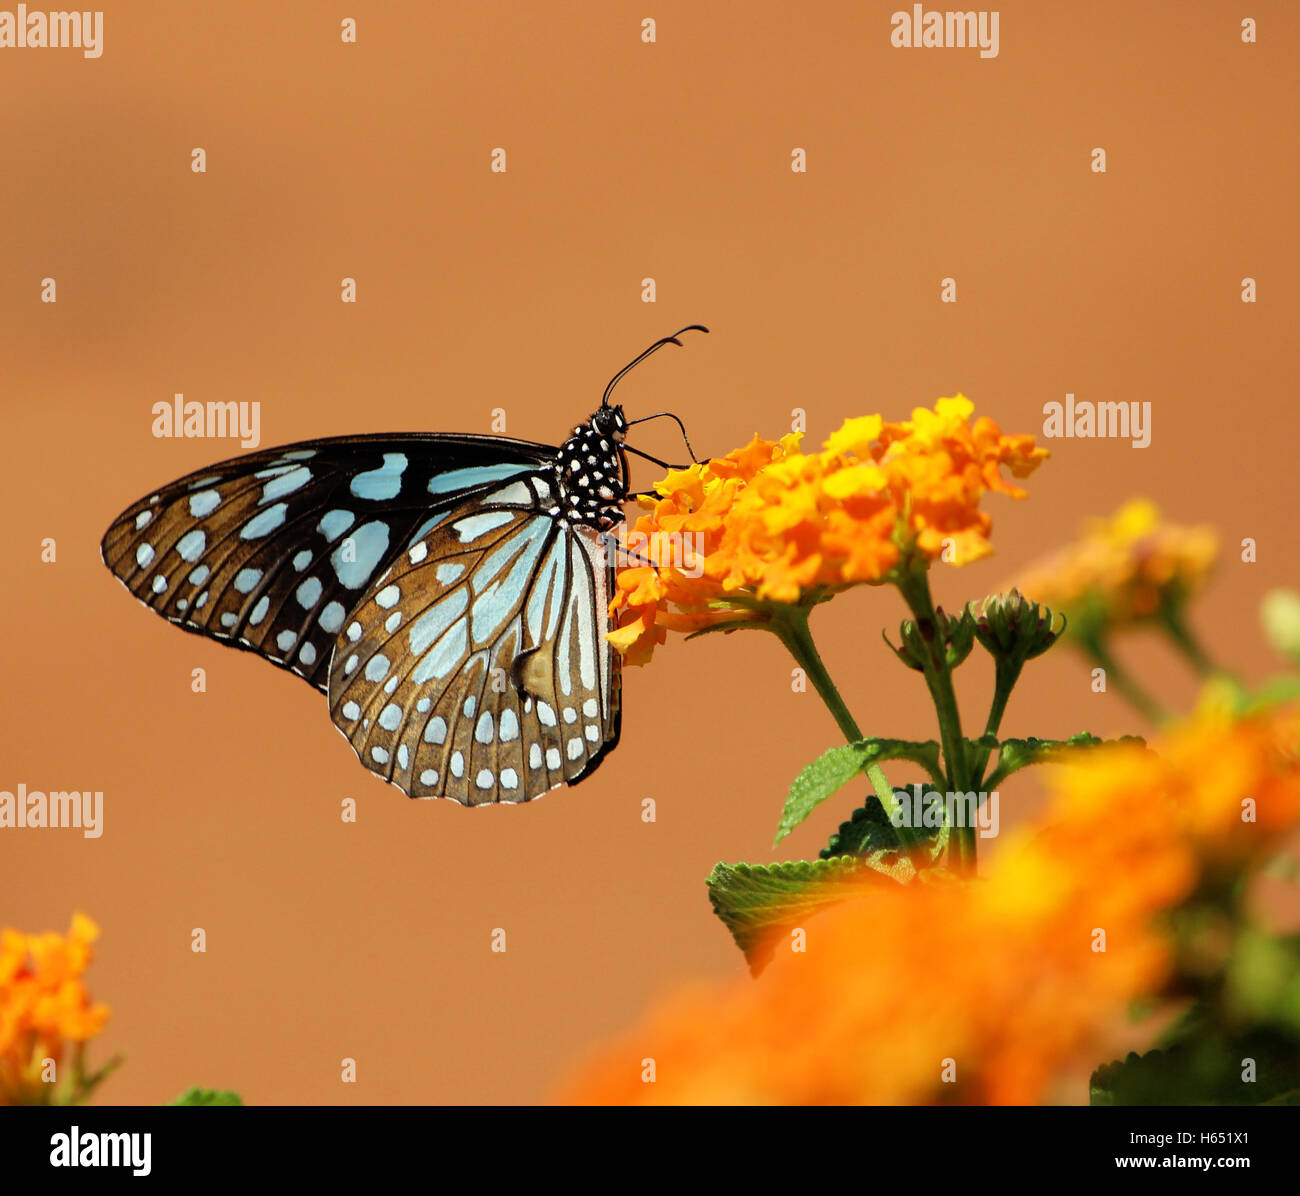 Blue Tiger butterfly feeding Scientific name - Tirumala limniace - Butterflies of the Indian subcontinent Stock Photo